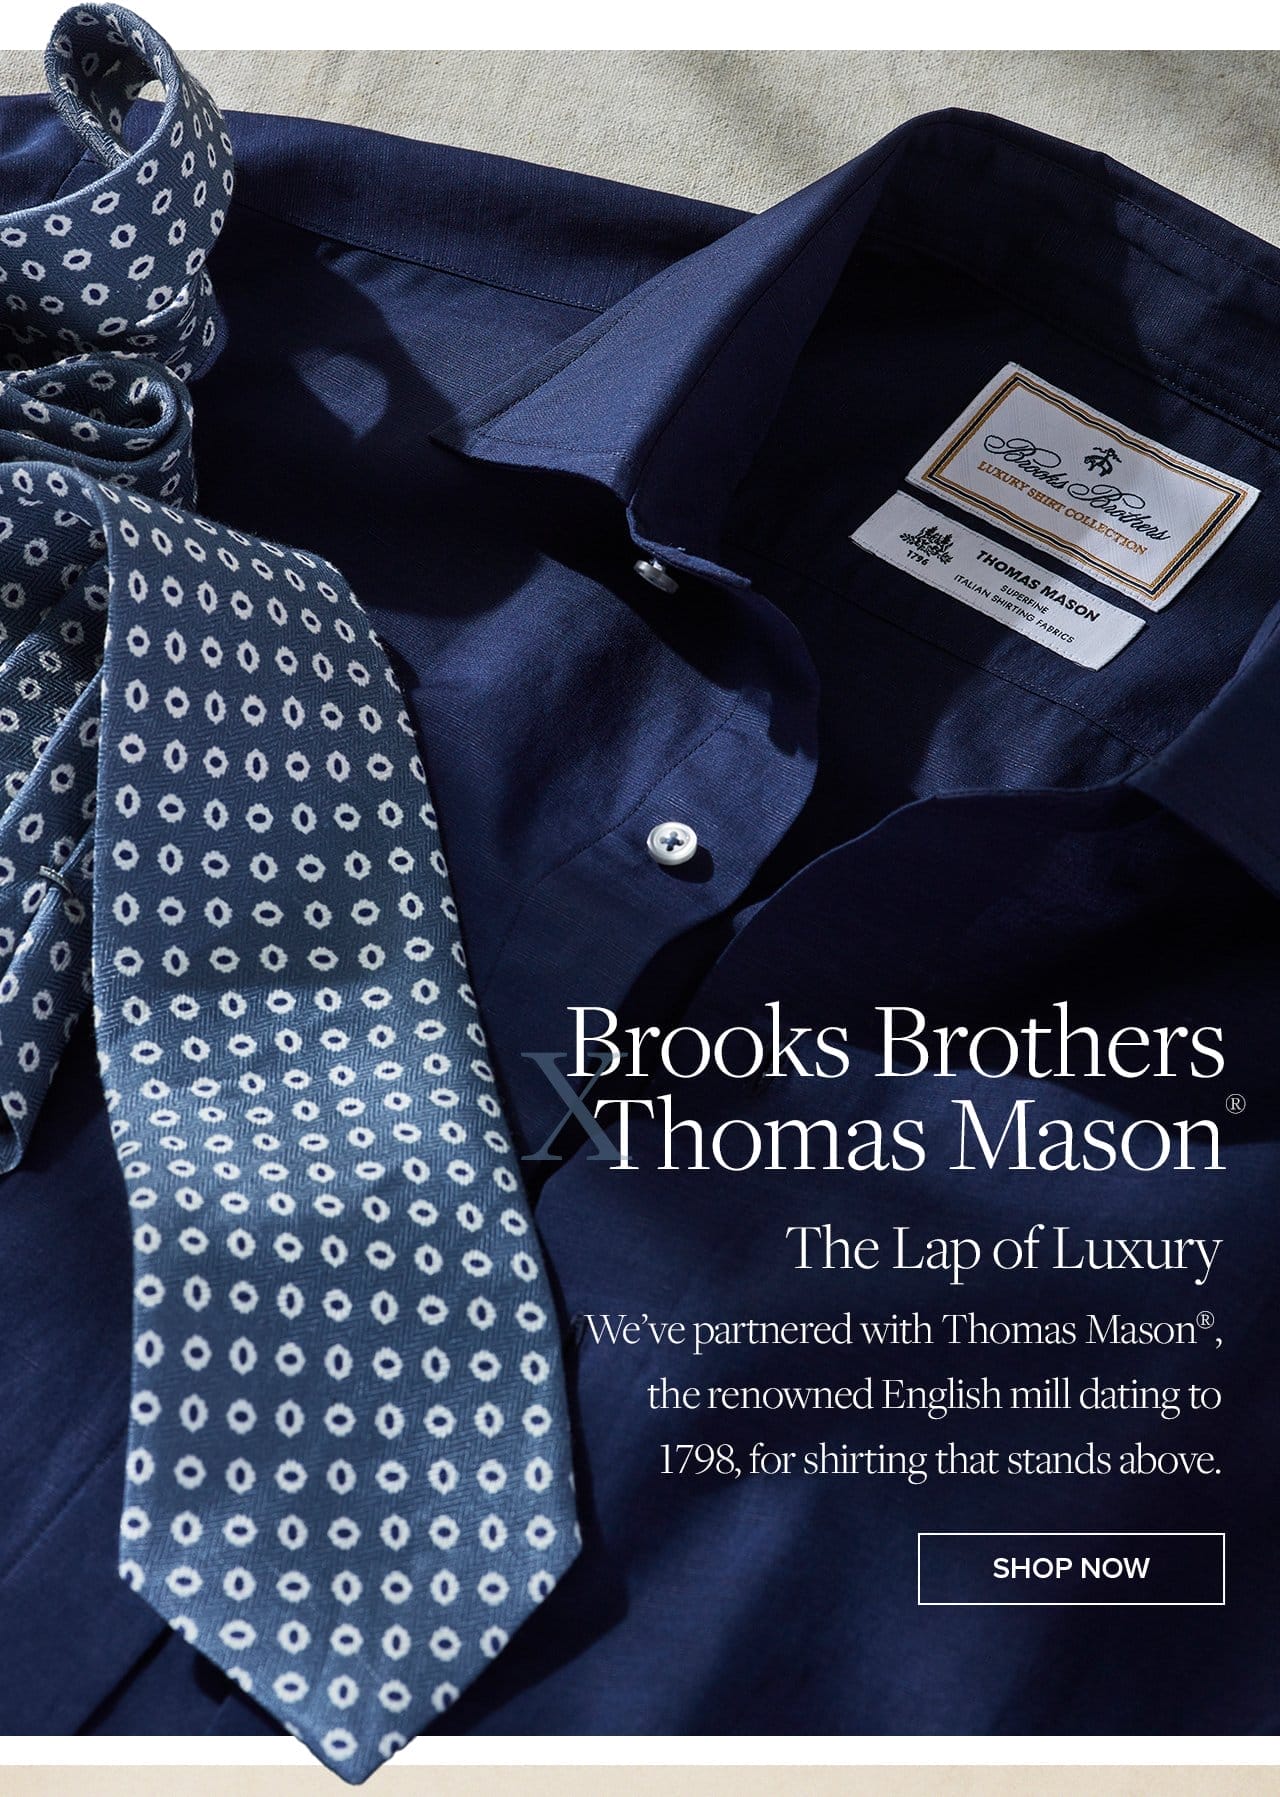 Brooks Brothers Thomas Mason The Lap of Luxury We've partnered with Thomas Mason the renowned English mill dating to 1798 for shirting that stands above. Shop Now